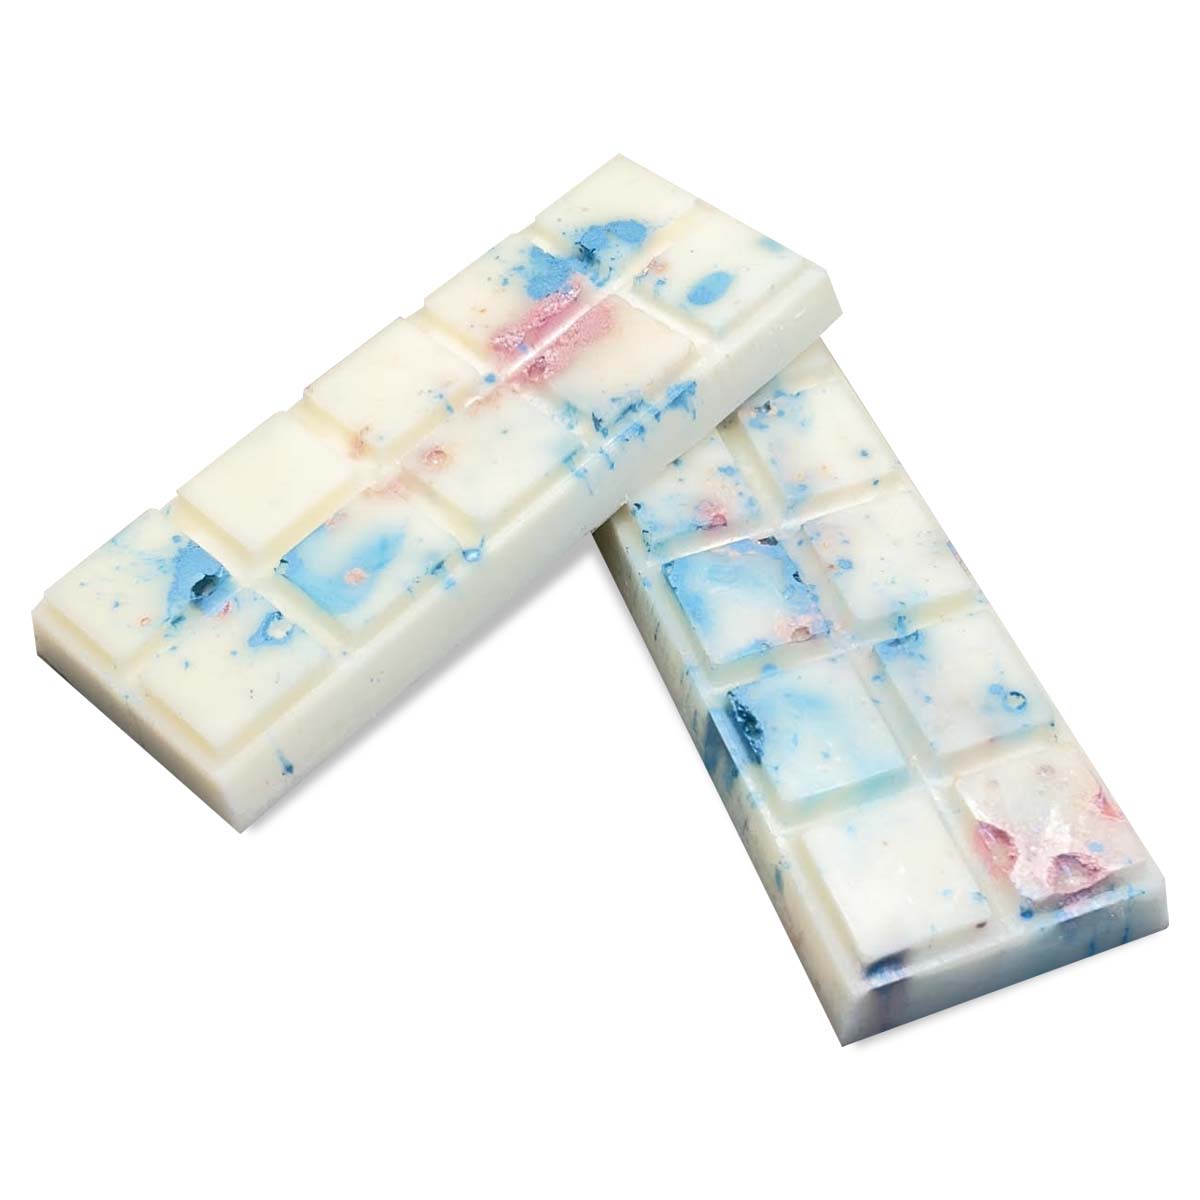 Discover the purity of our unwrapped Lily and Cotton Snap Bar. Its natural soy wax emits a soothing blend of floral and fresh linen notes.